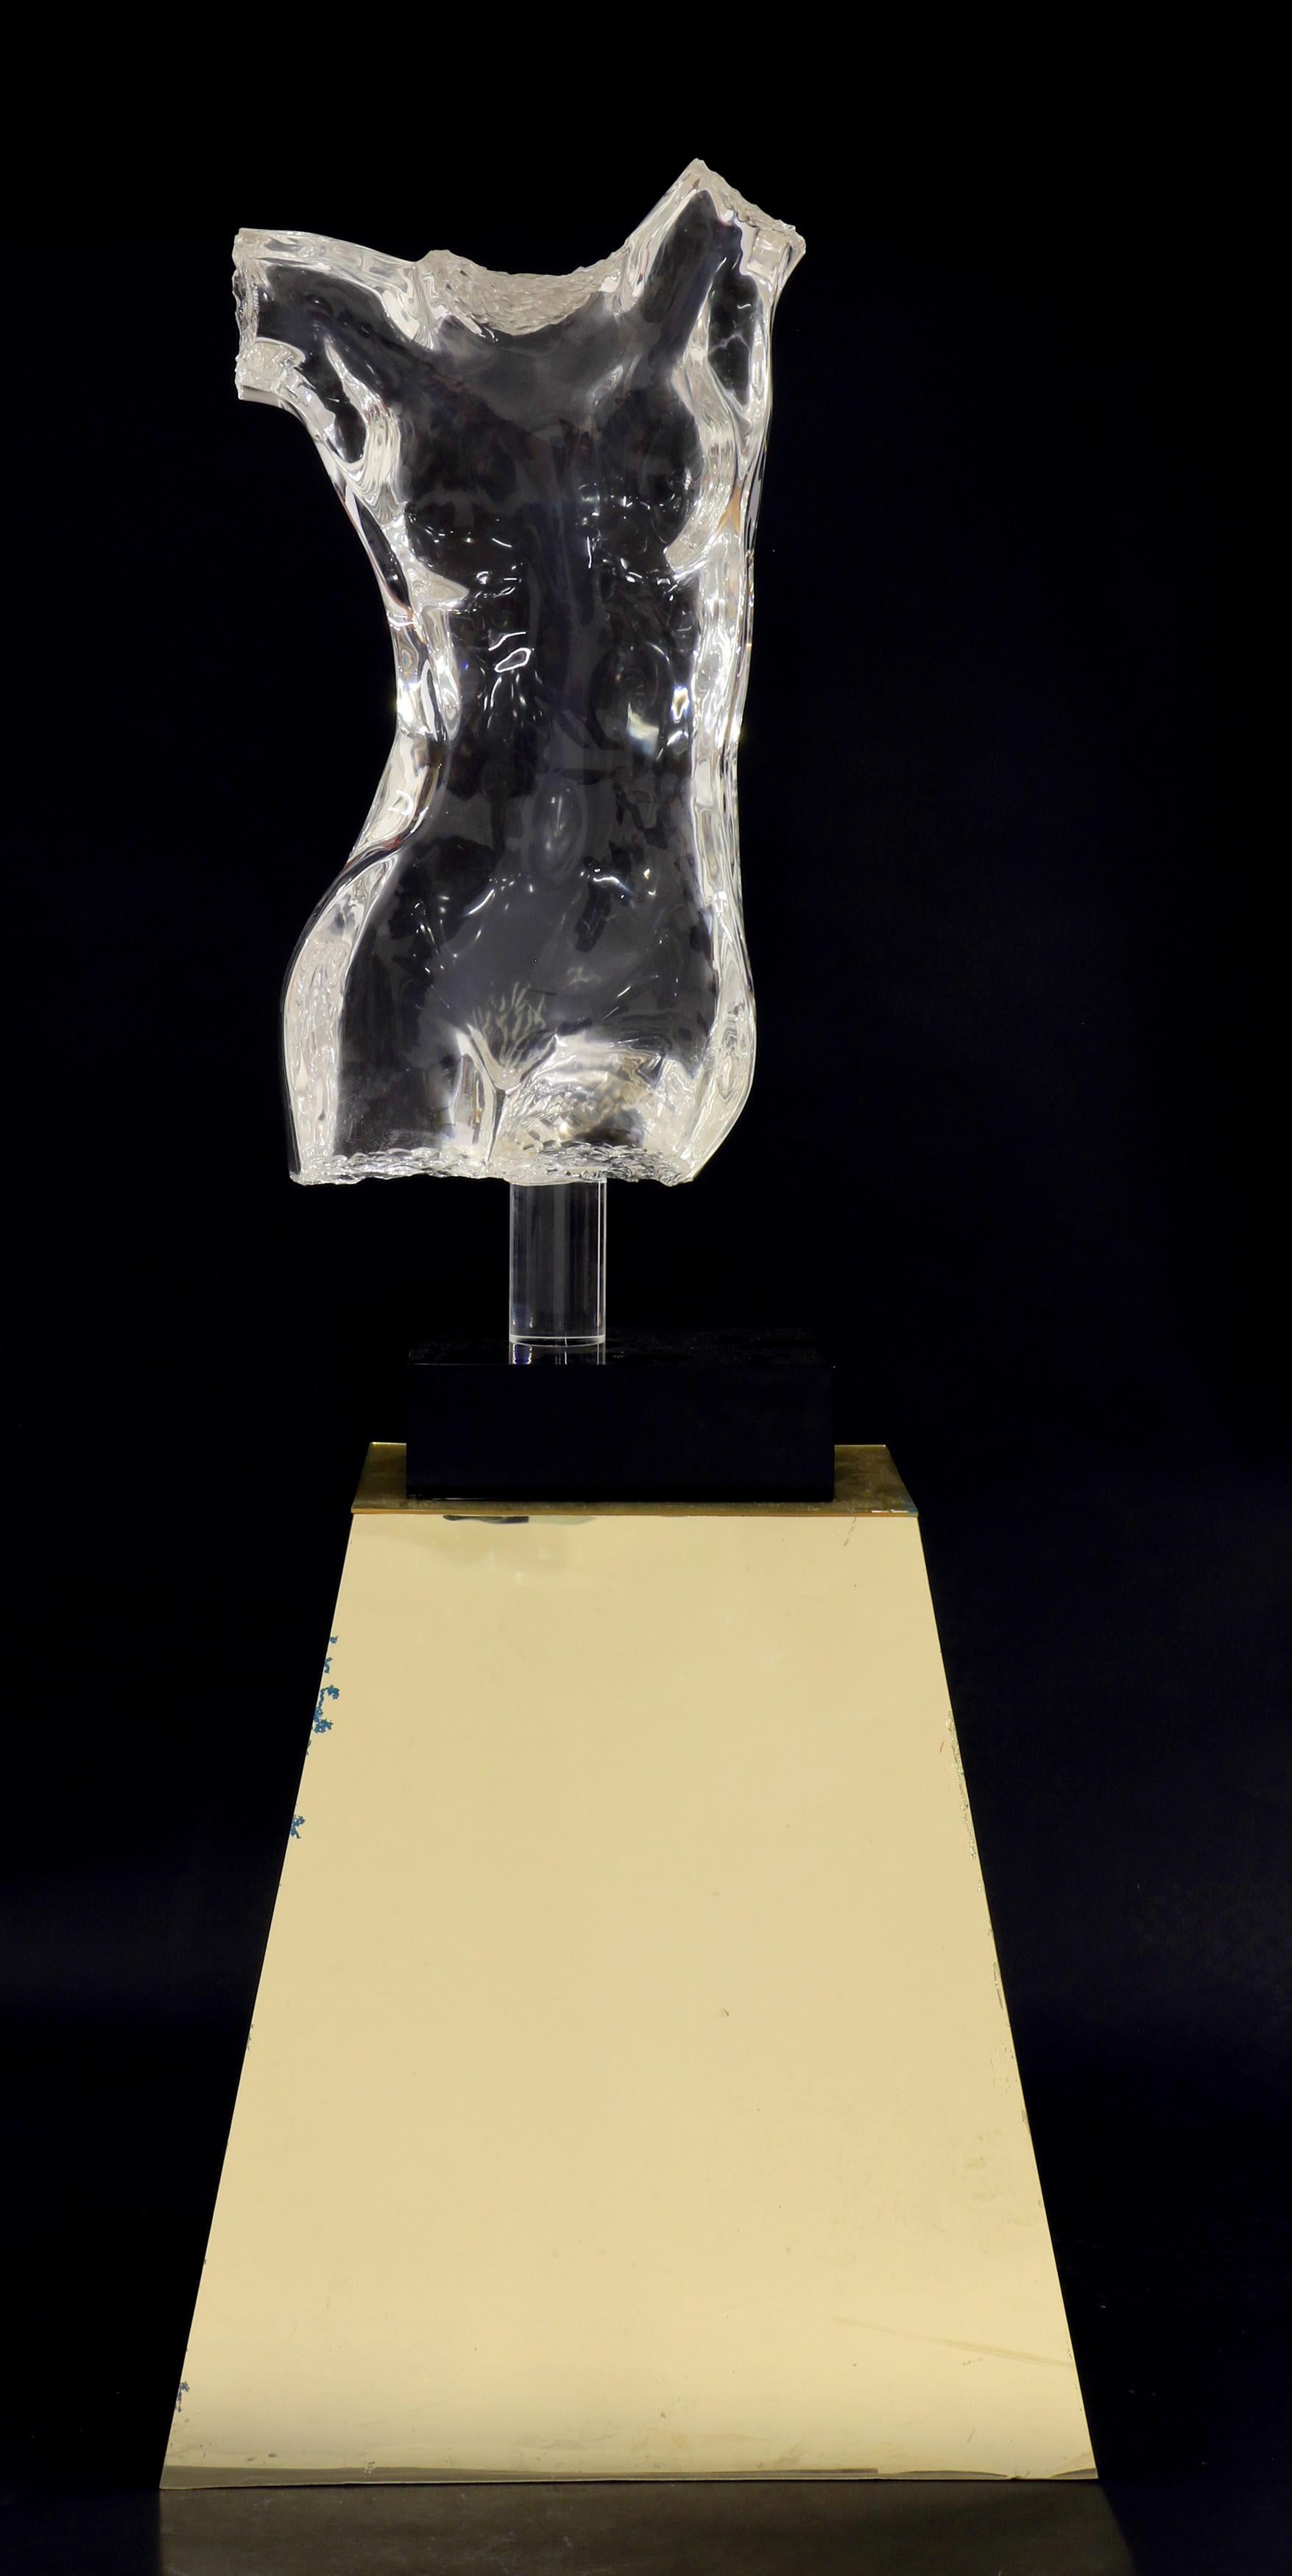 A life size solid acrylic/lucite nude Greek female torso sculpture. This breathtaking sculpture features the most beautiful female form with great detail. Sculpture is unsigned but definitely in the manner of Frederick Hart (1943 - 1999). mid-20th